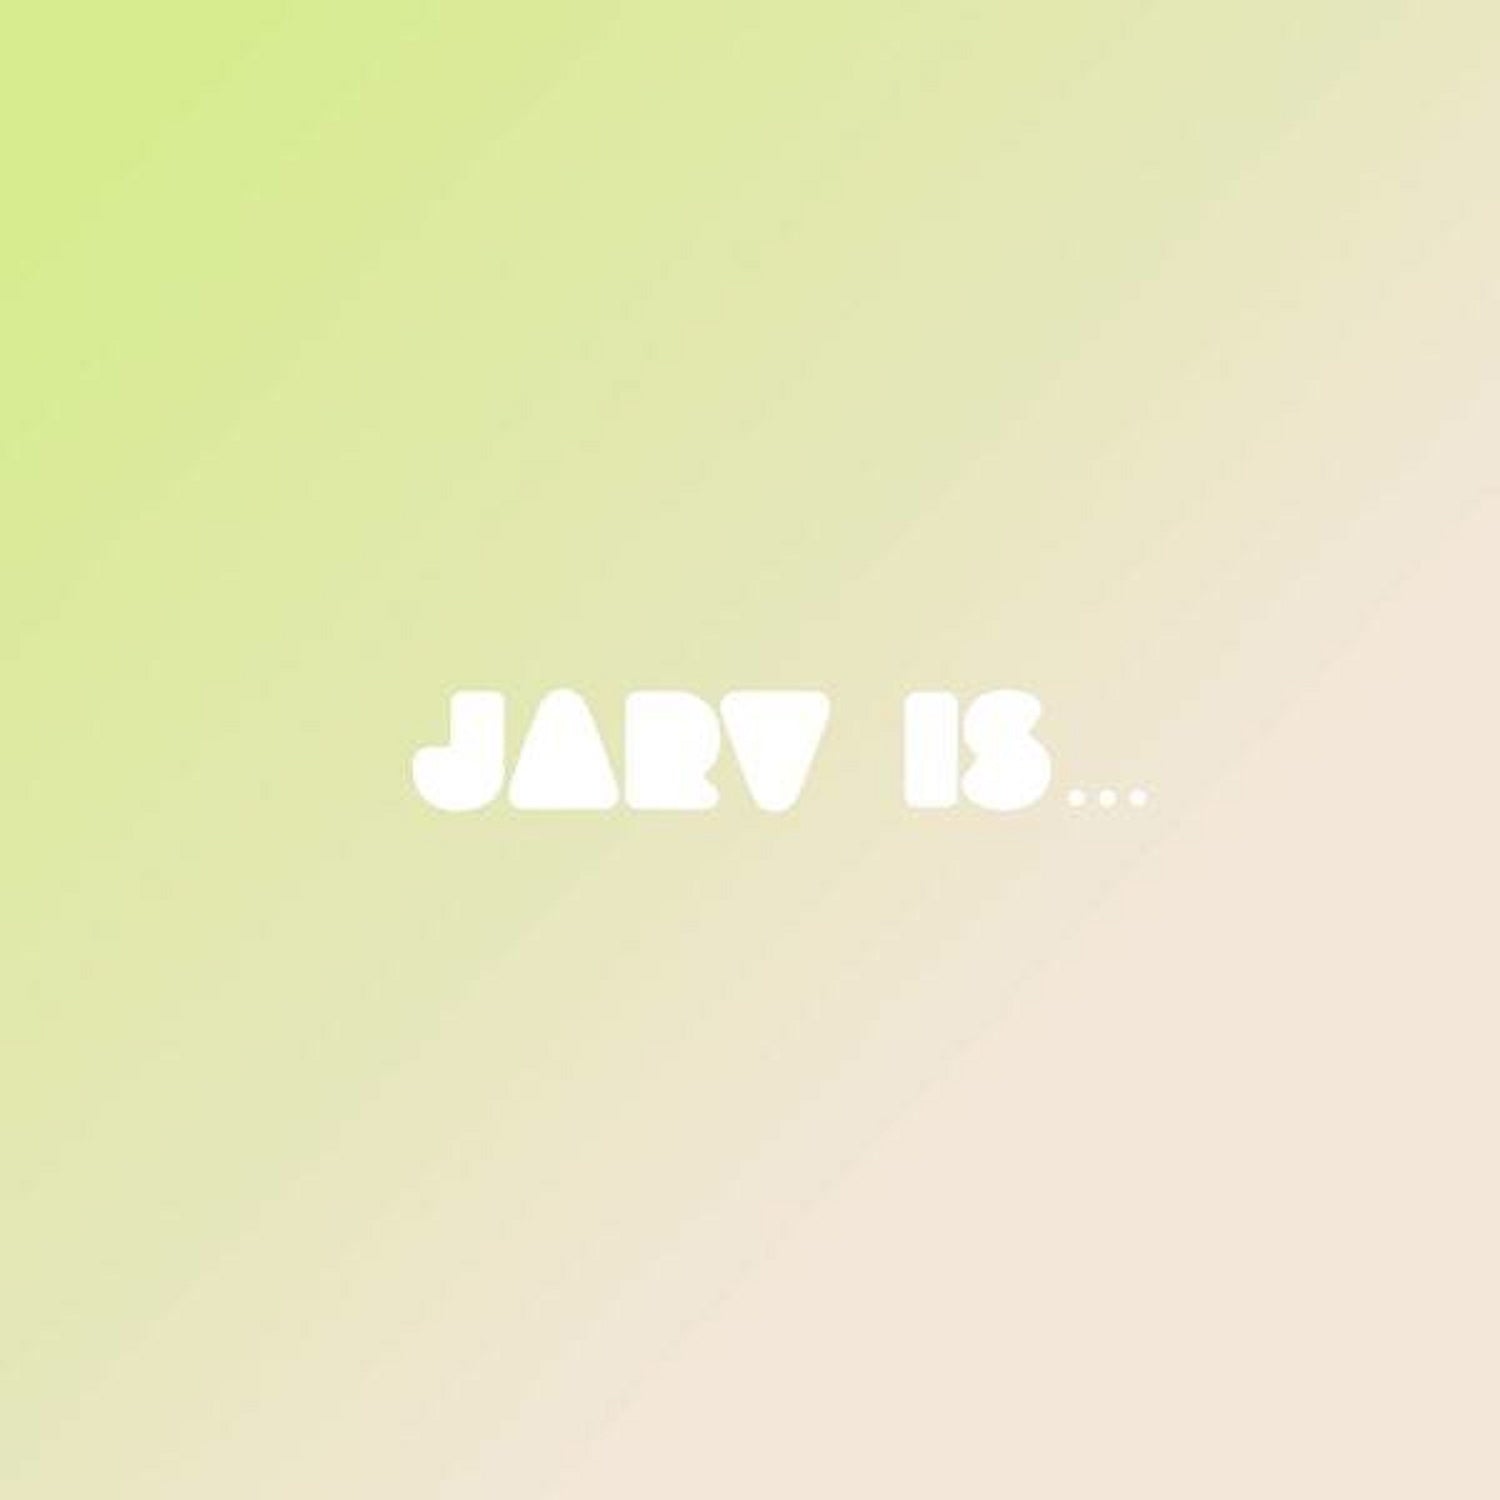 JARV IS... - Beyond The Pale - BROKEN 8 RECORDS